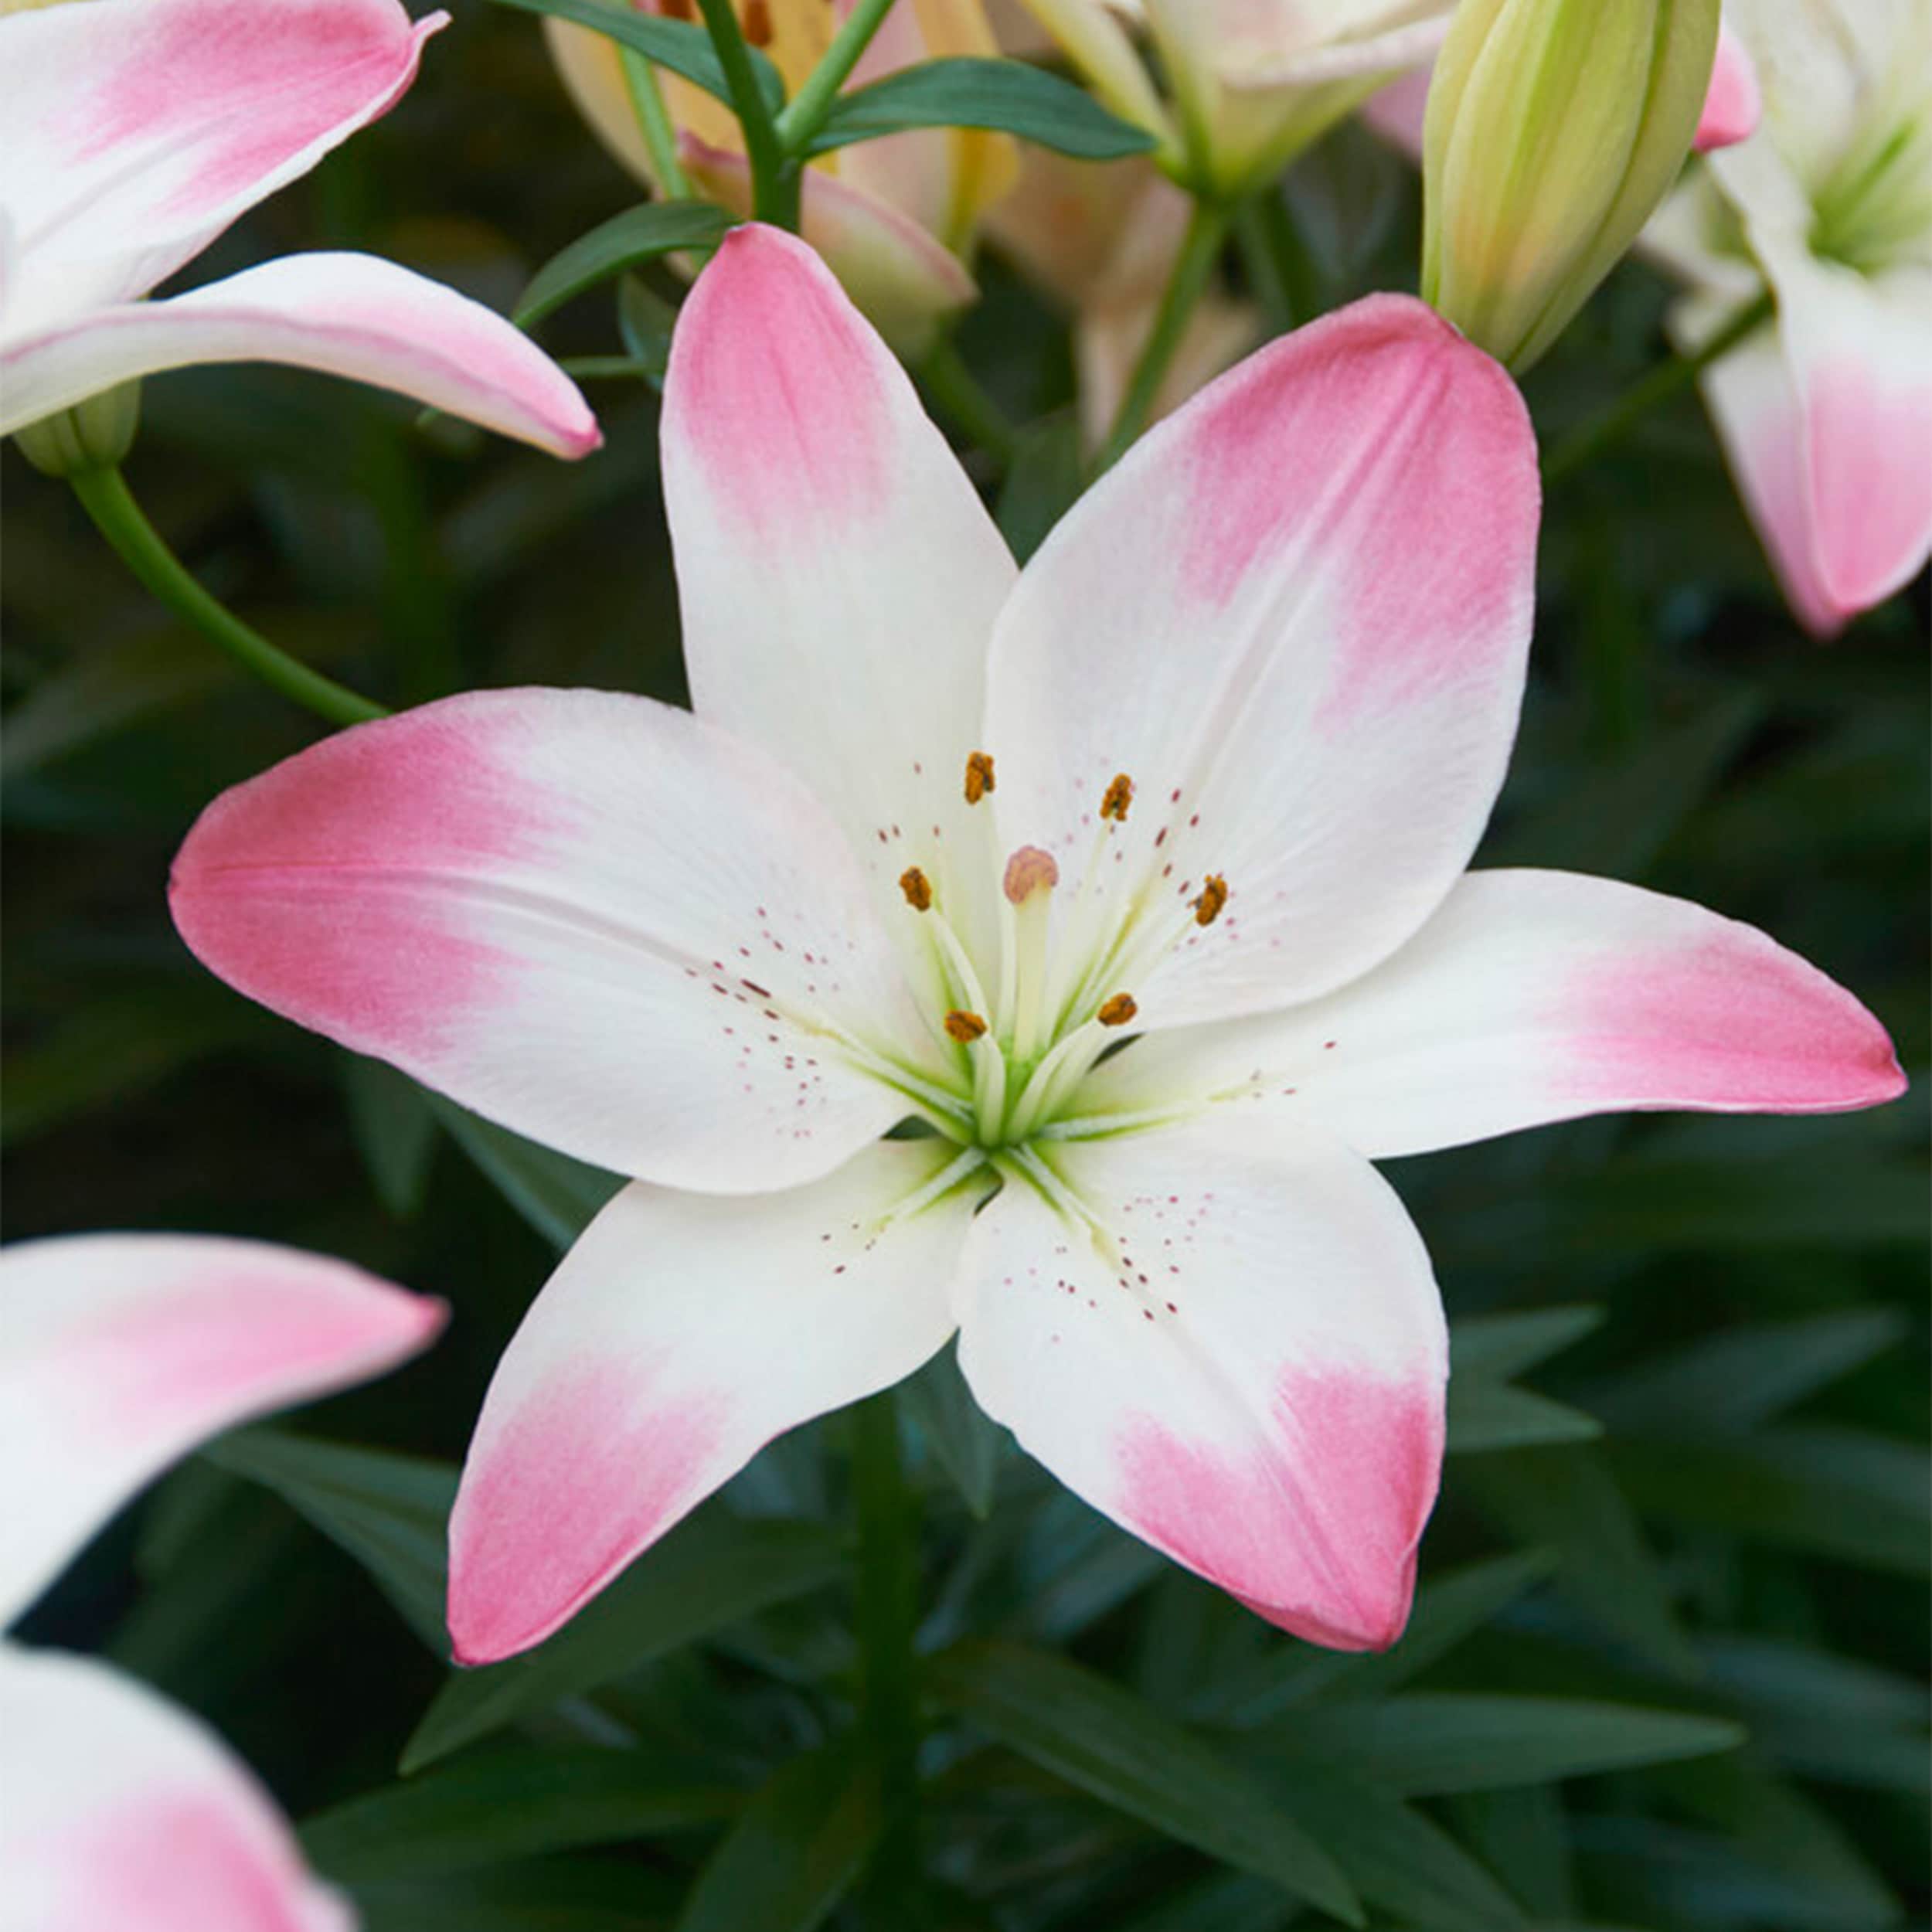 Lowe's Pink Lily Bulbs Bagged 6-Count - Attracts Butterflies